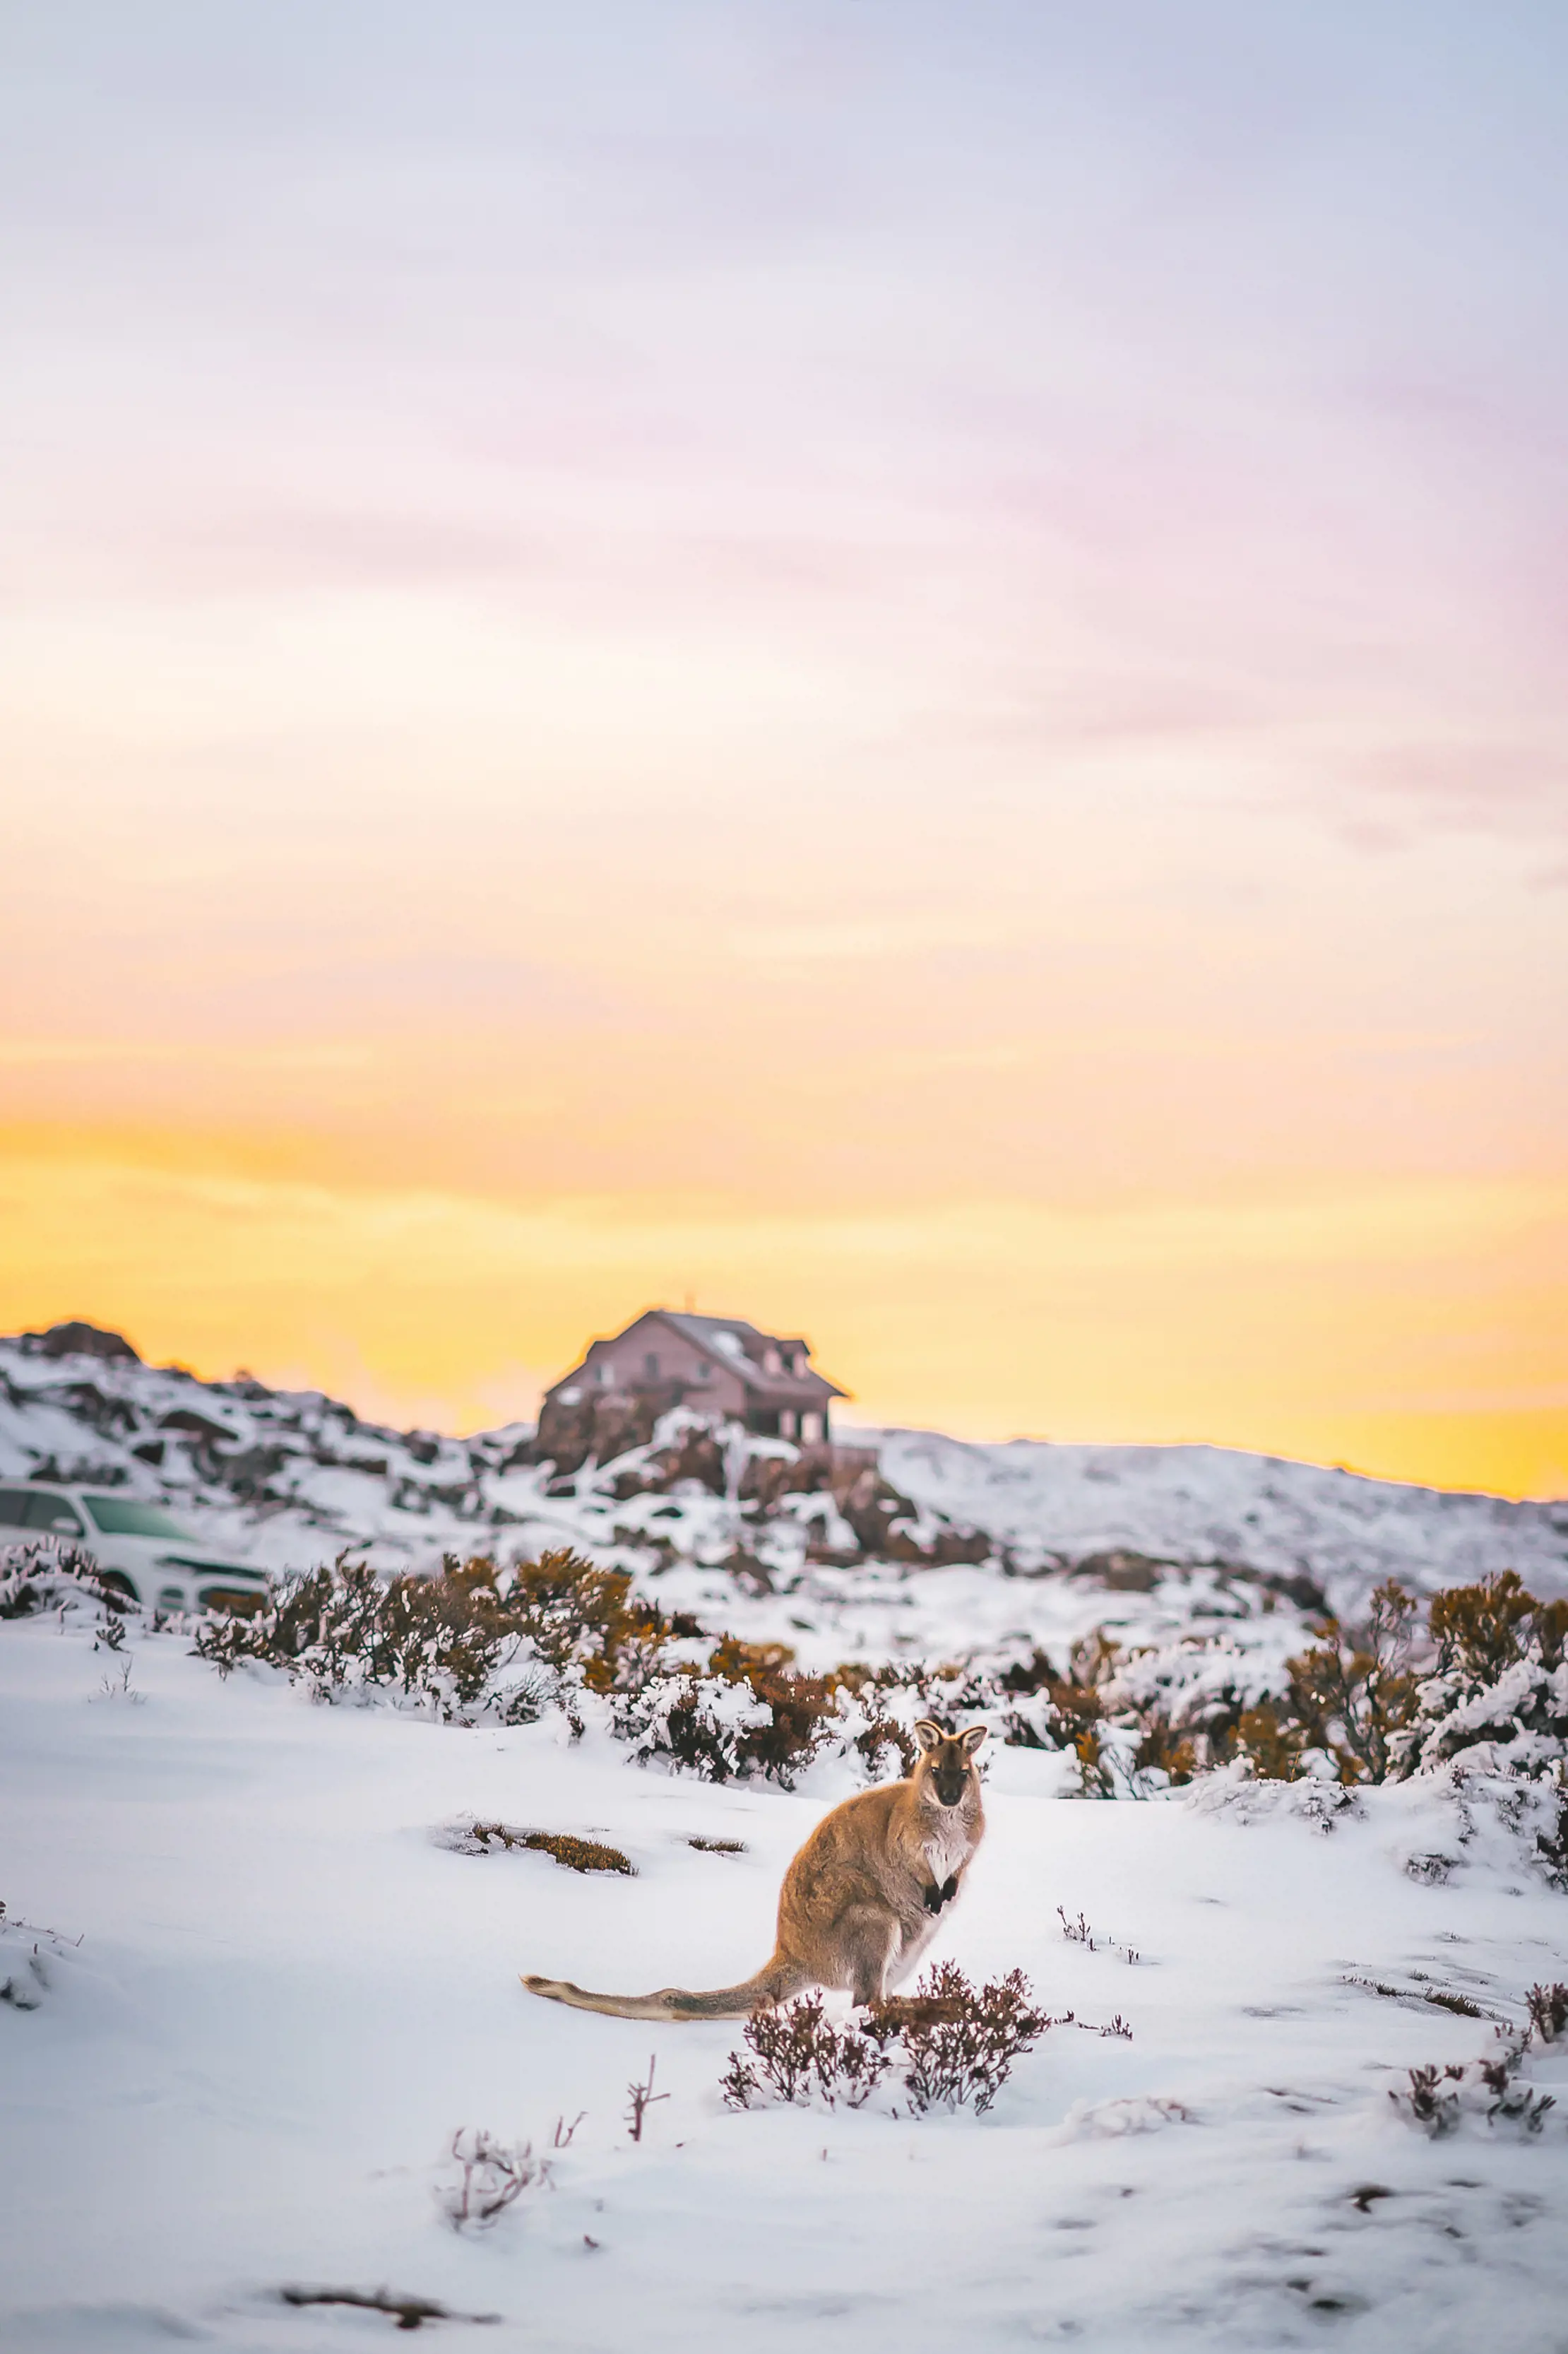 Wallaby looking at the camera, surrounded by snow with a small hut in the background, on a cold, winter's morning.